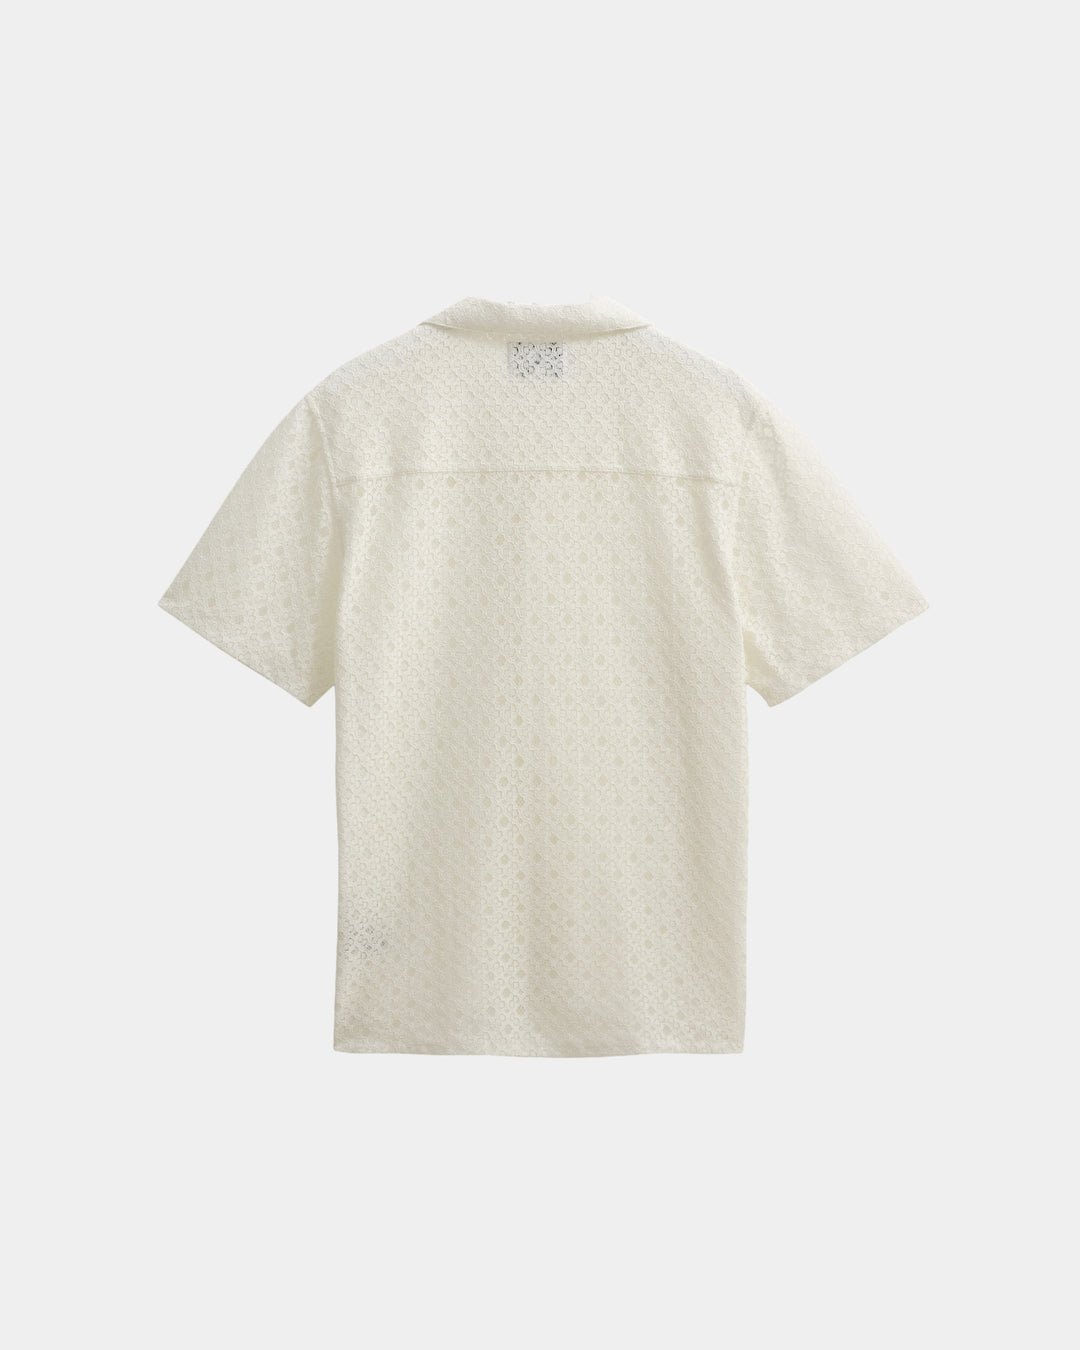 Wax London Didcot Corded Lace Shirt - White